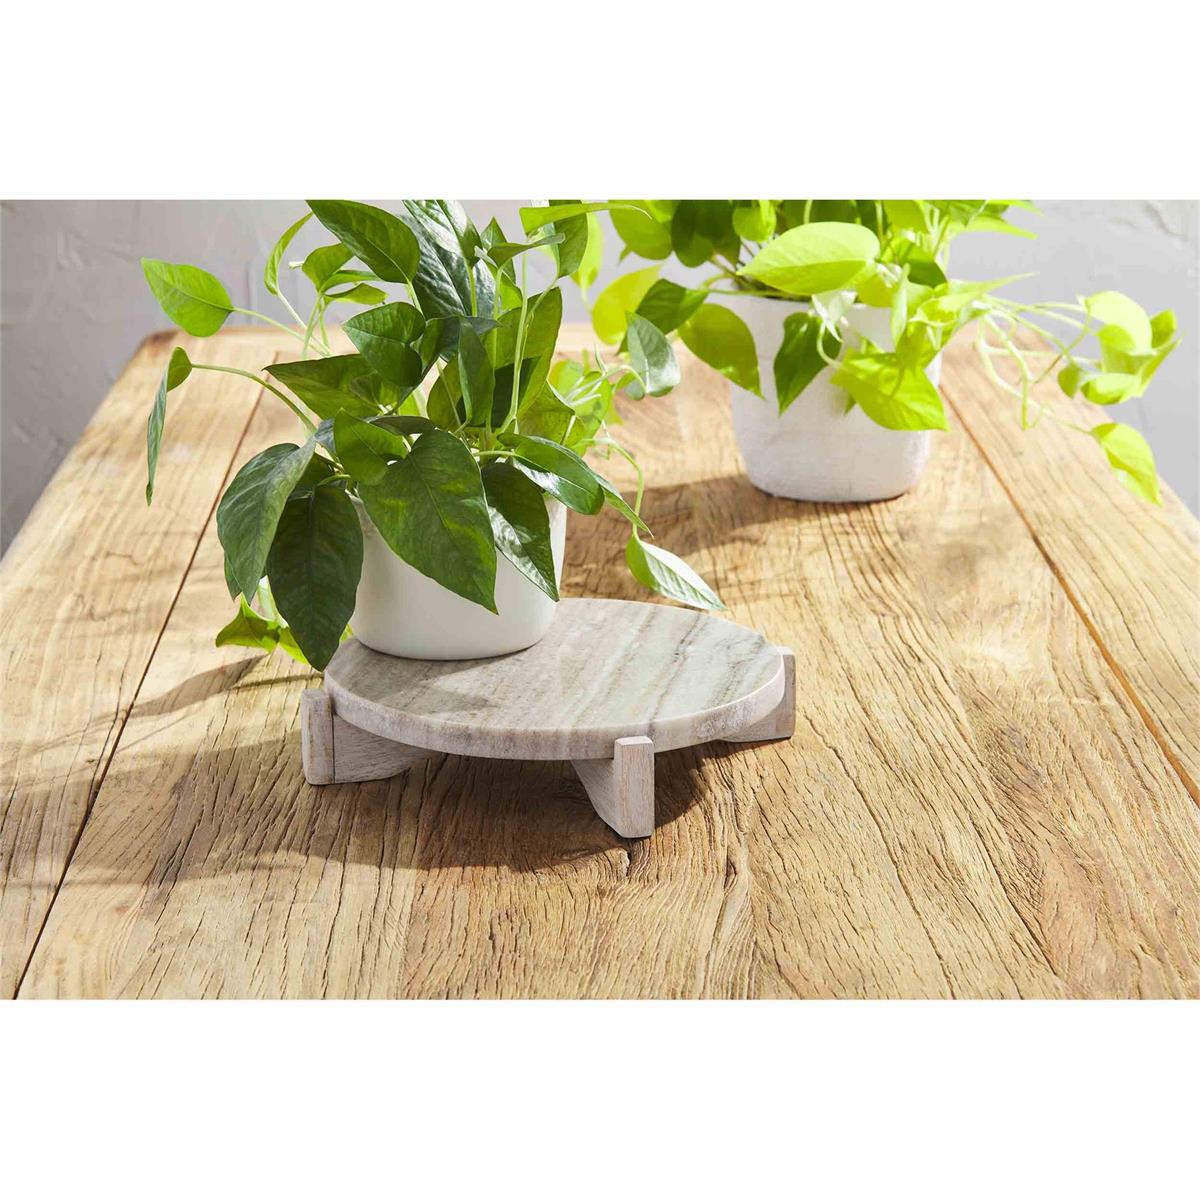 marble and wood pedestal displayed on rustic wood table with a potted plant on top